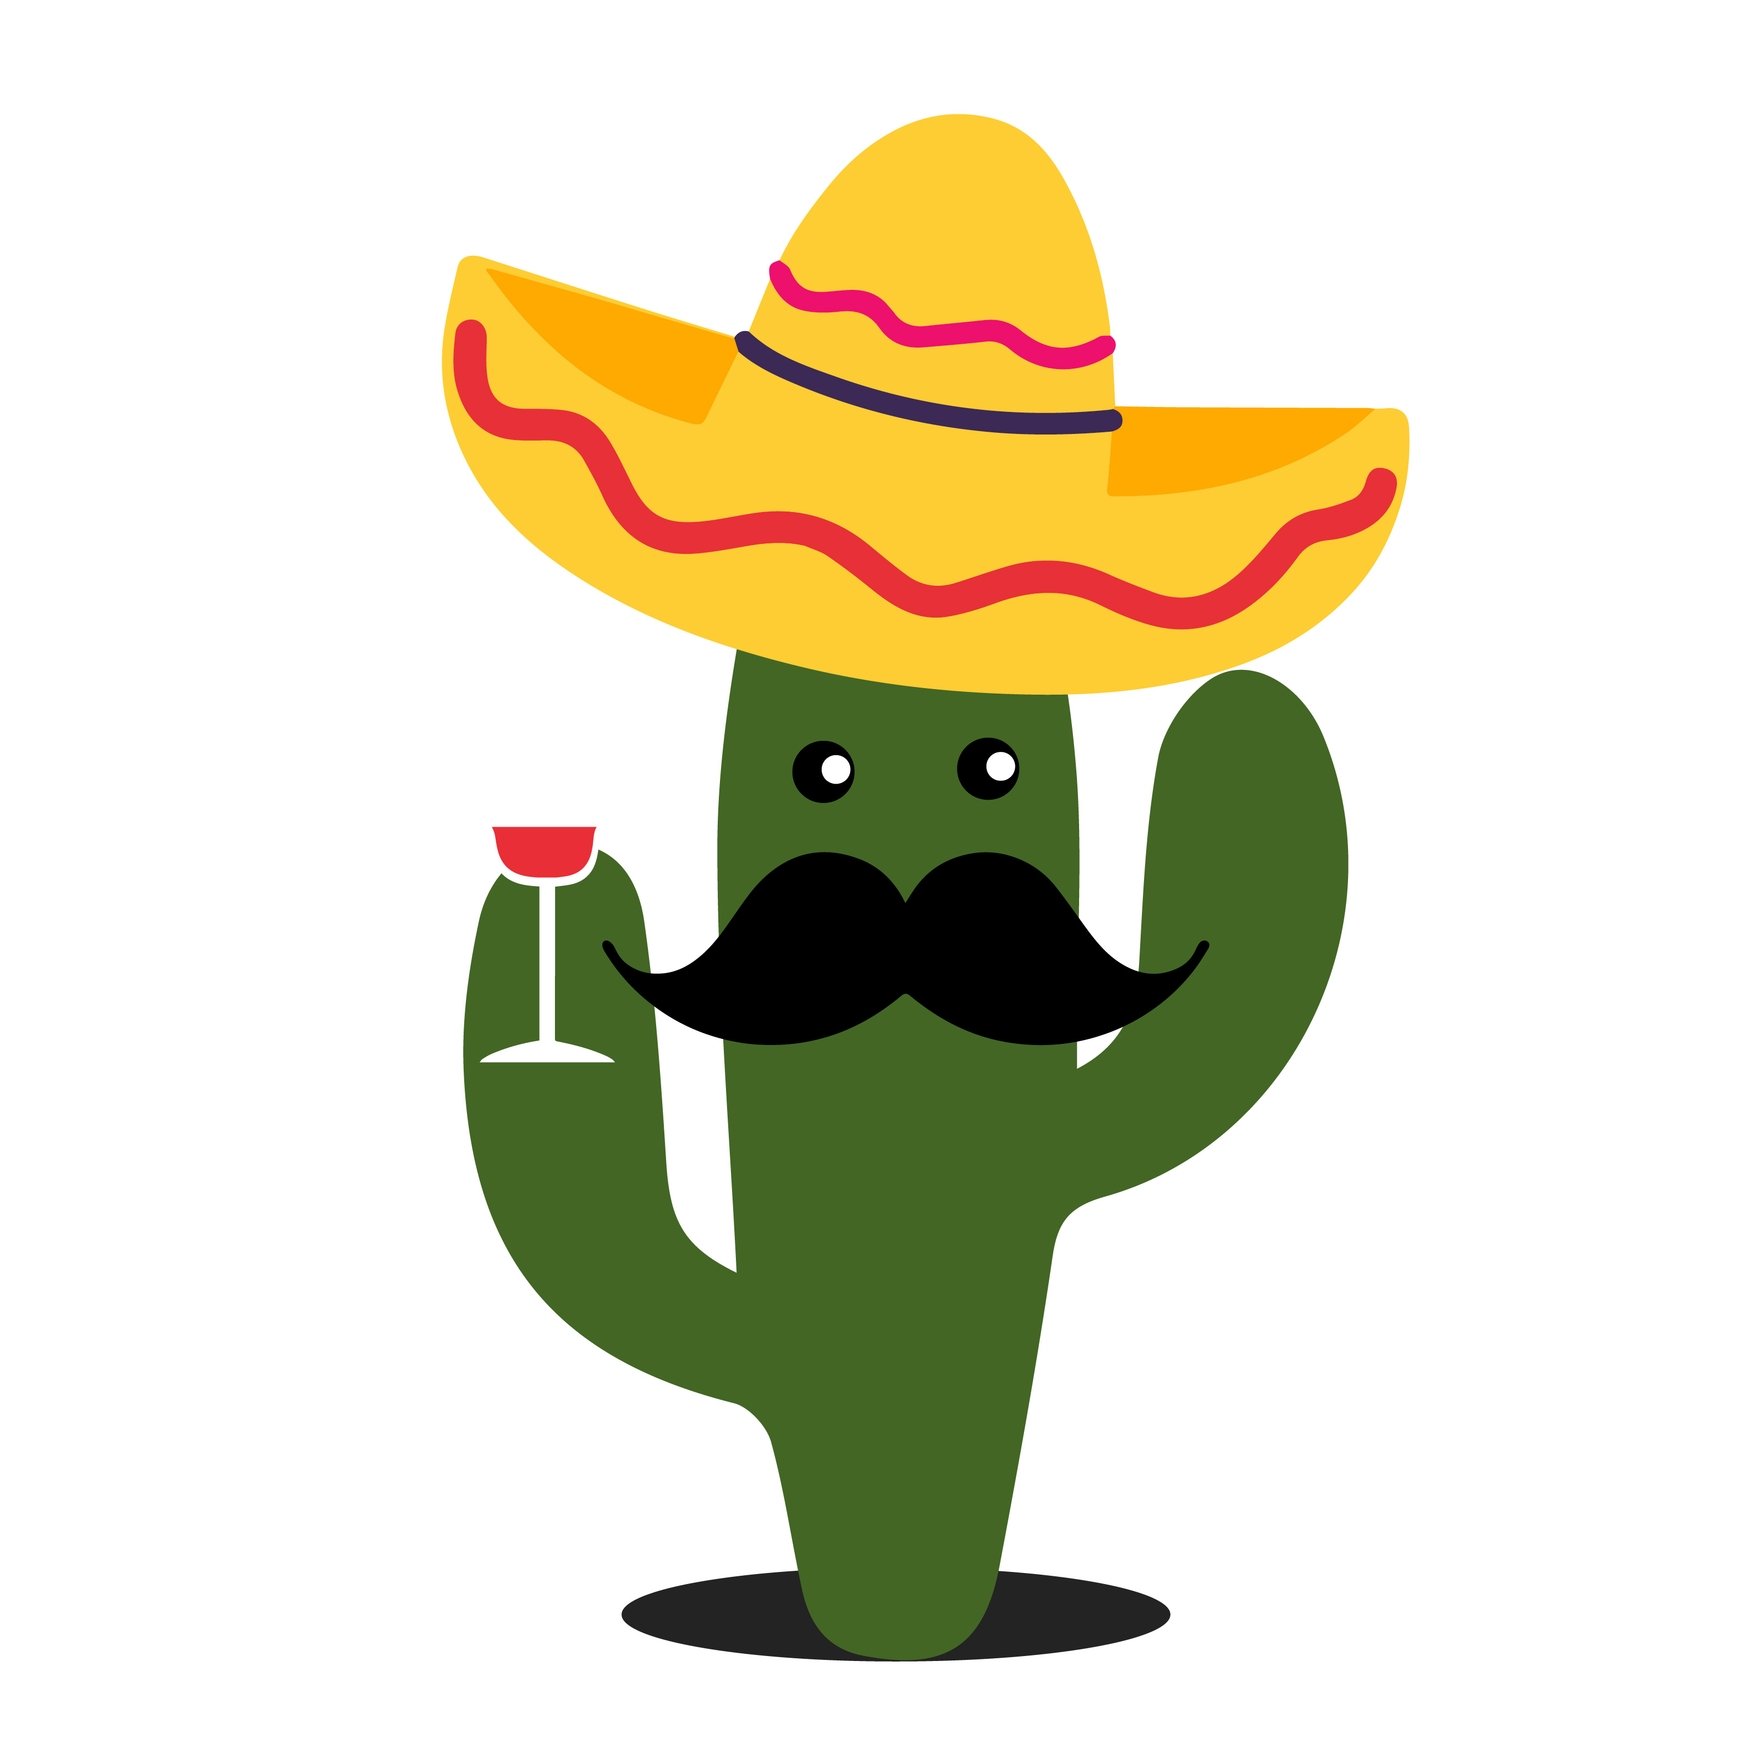 Funny Cinco De Mayo Gif in Illustrator, EPS, SVG, JPG, GIF, PNG, After Effects